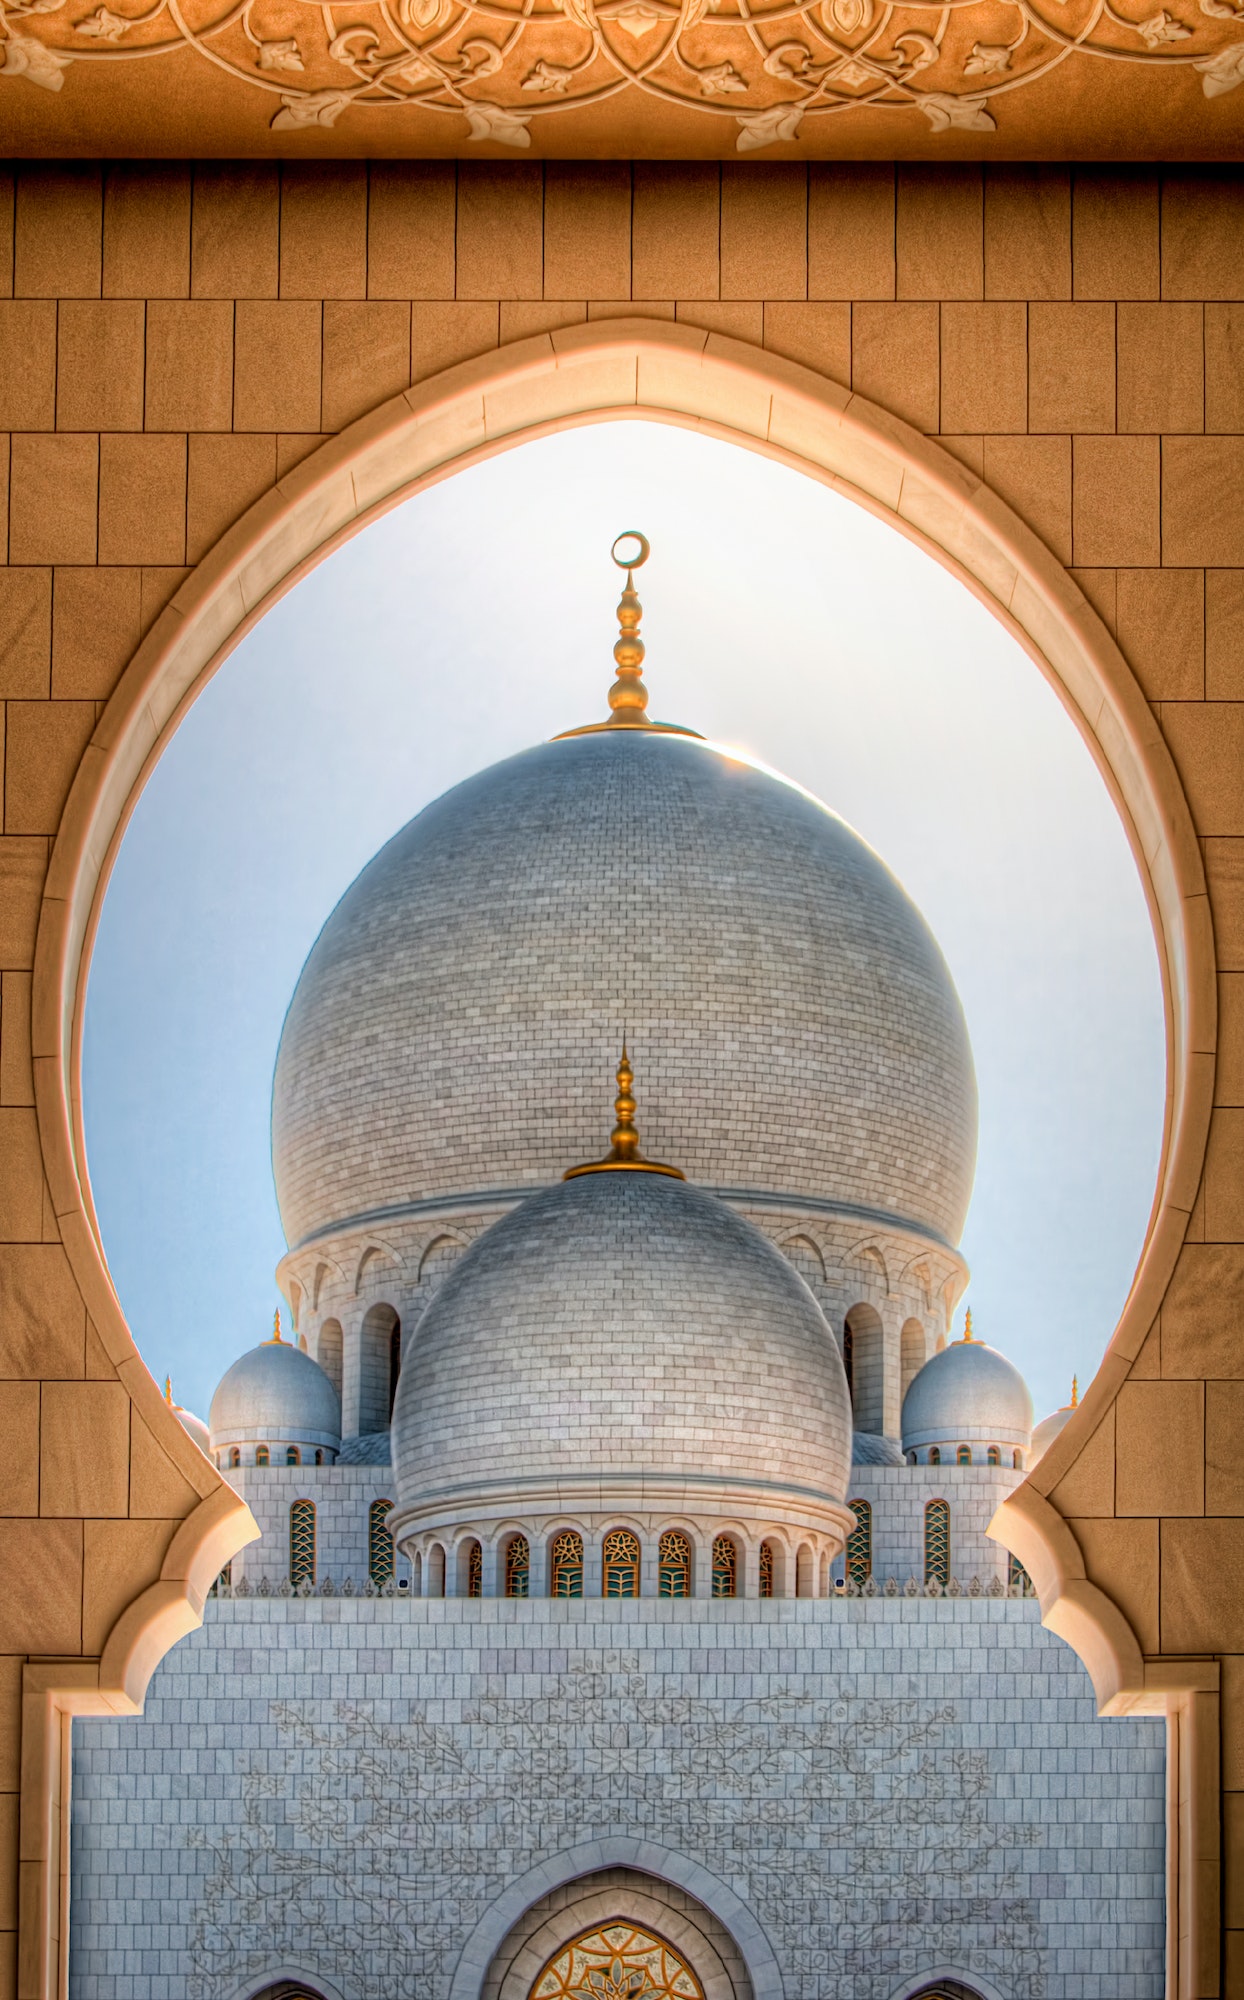 Detail view at Dome of Sheikh Zayed Grand Mosque, Abu Dhabi, United Arab Emirates